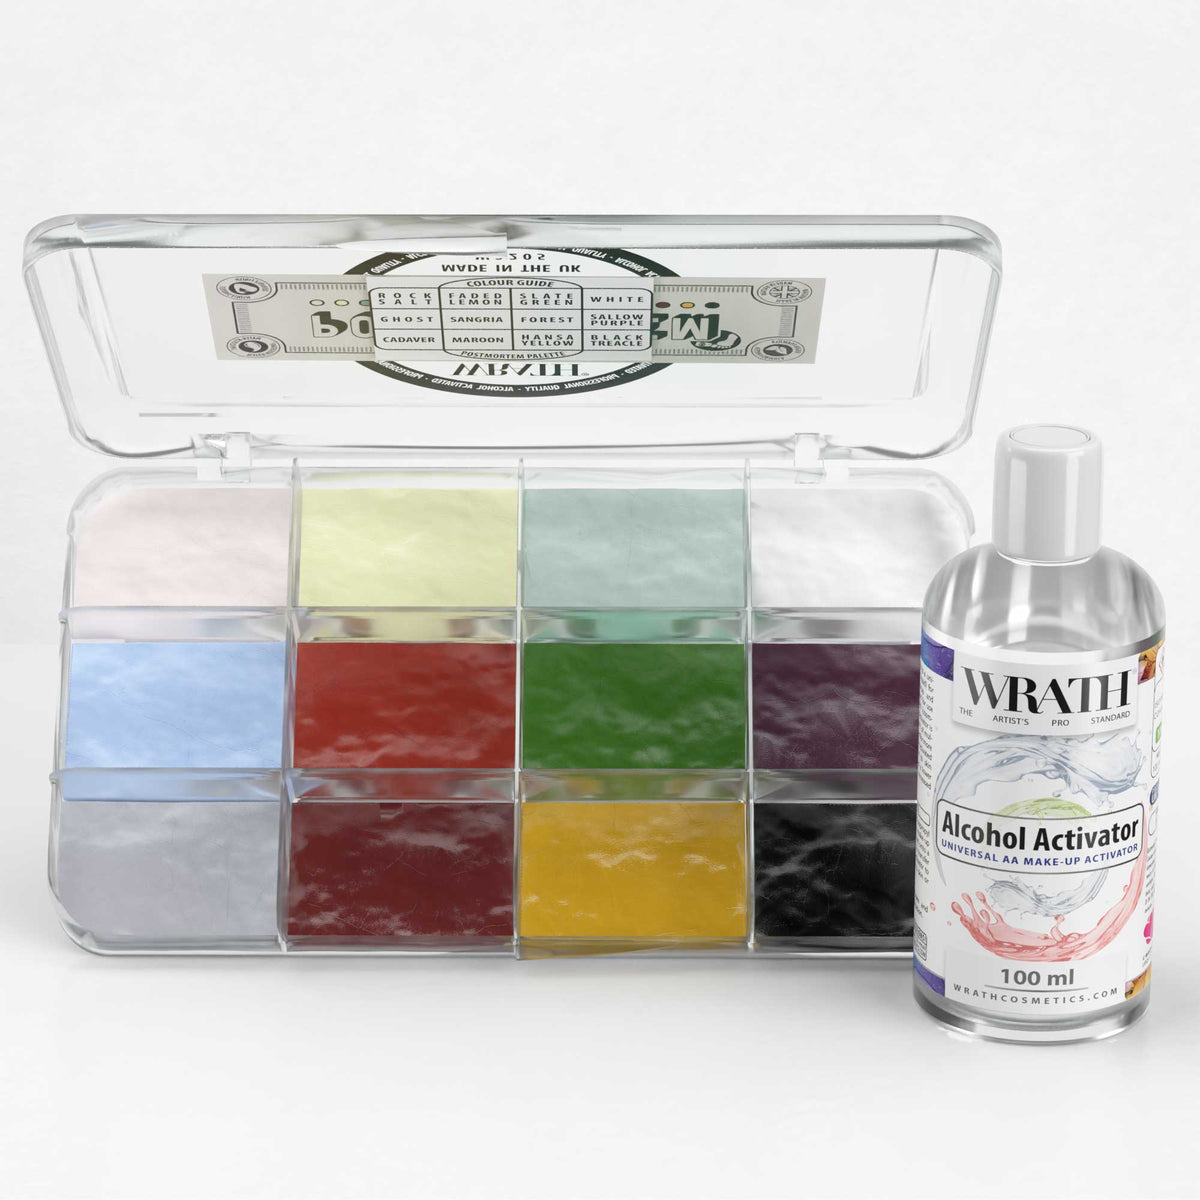 WRATH Alcohol Activated Make-up 12 Palette with Activator - Postmortem